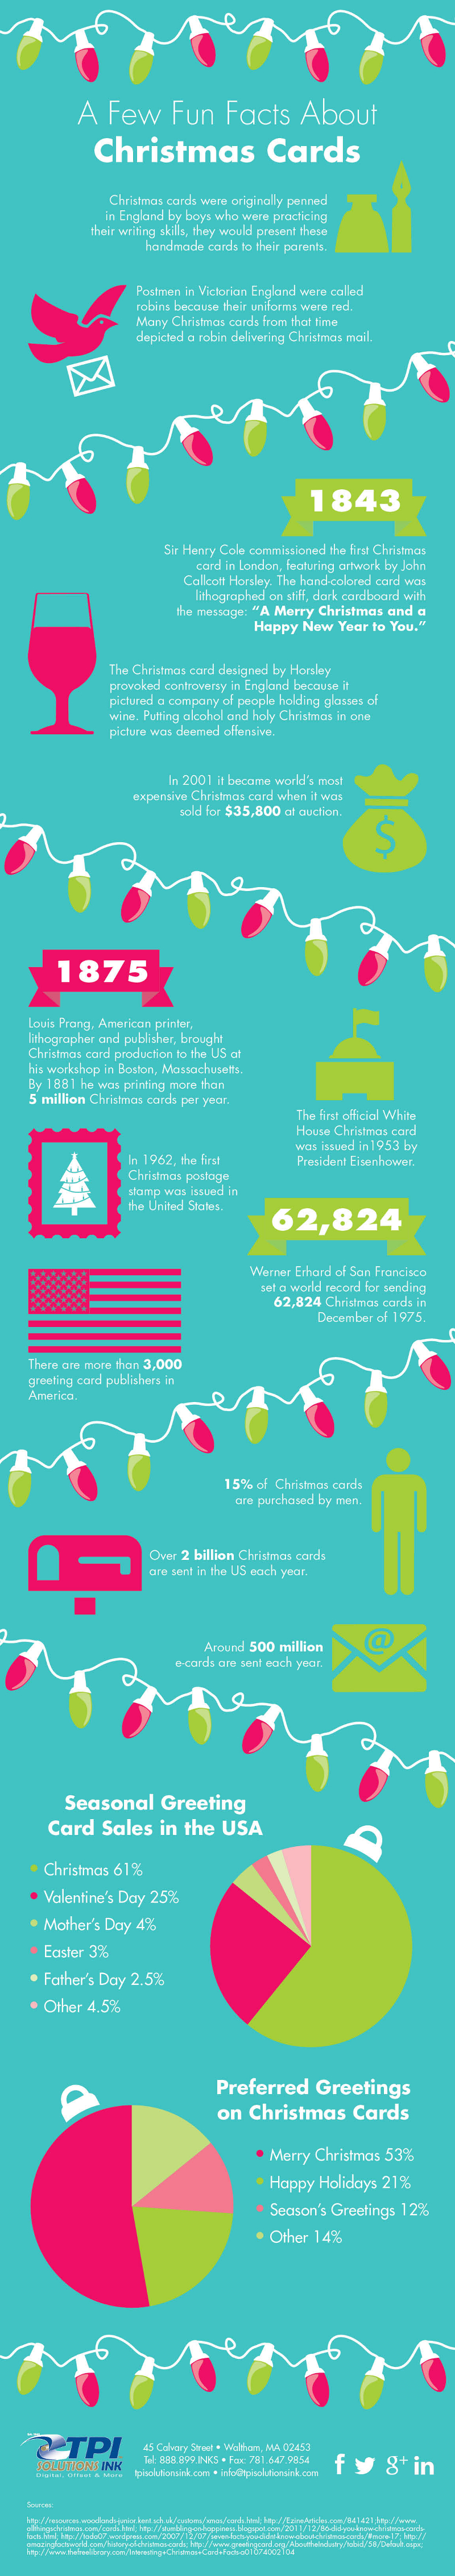 Facts About Christmas Cards